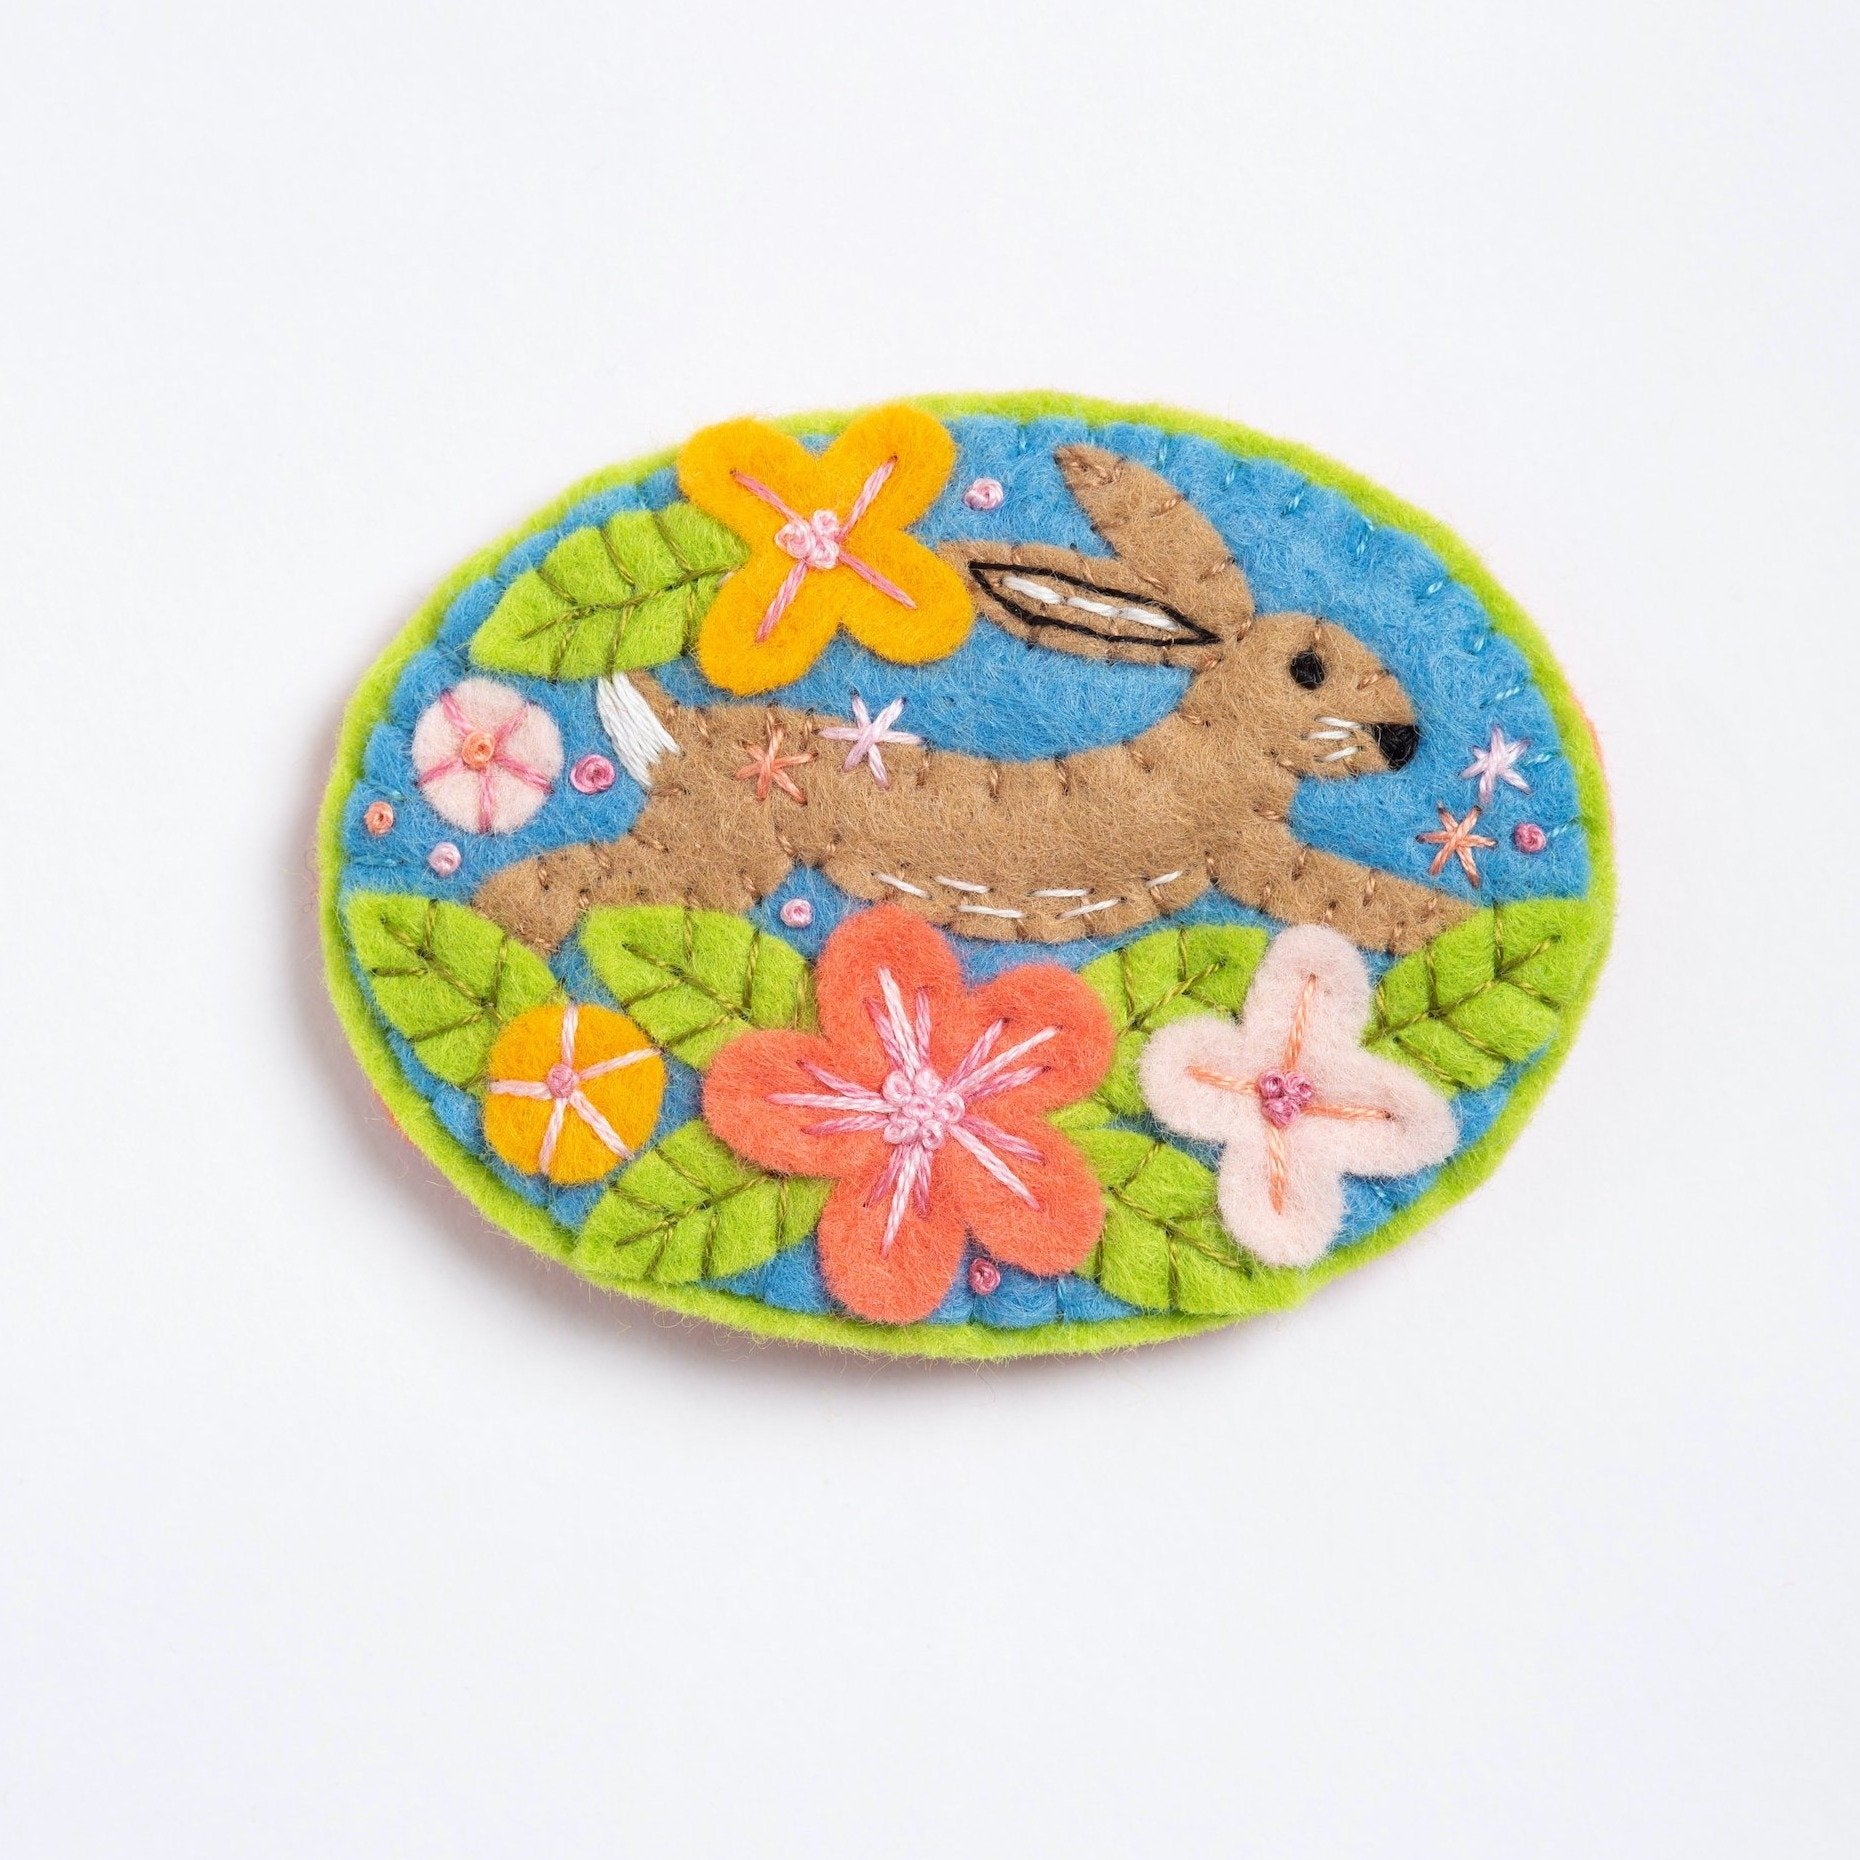 clipped image of hare felt craft brooch on white background.